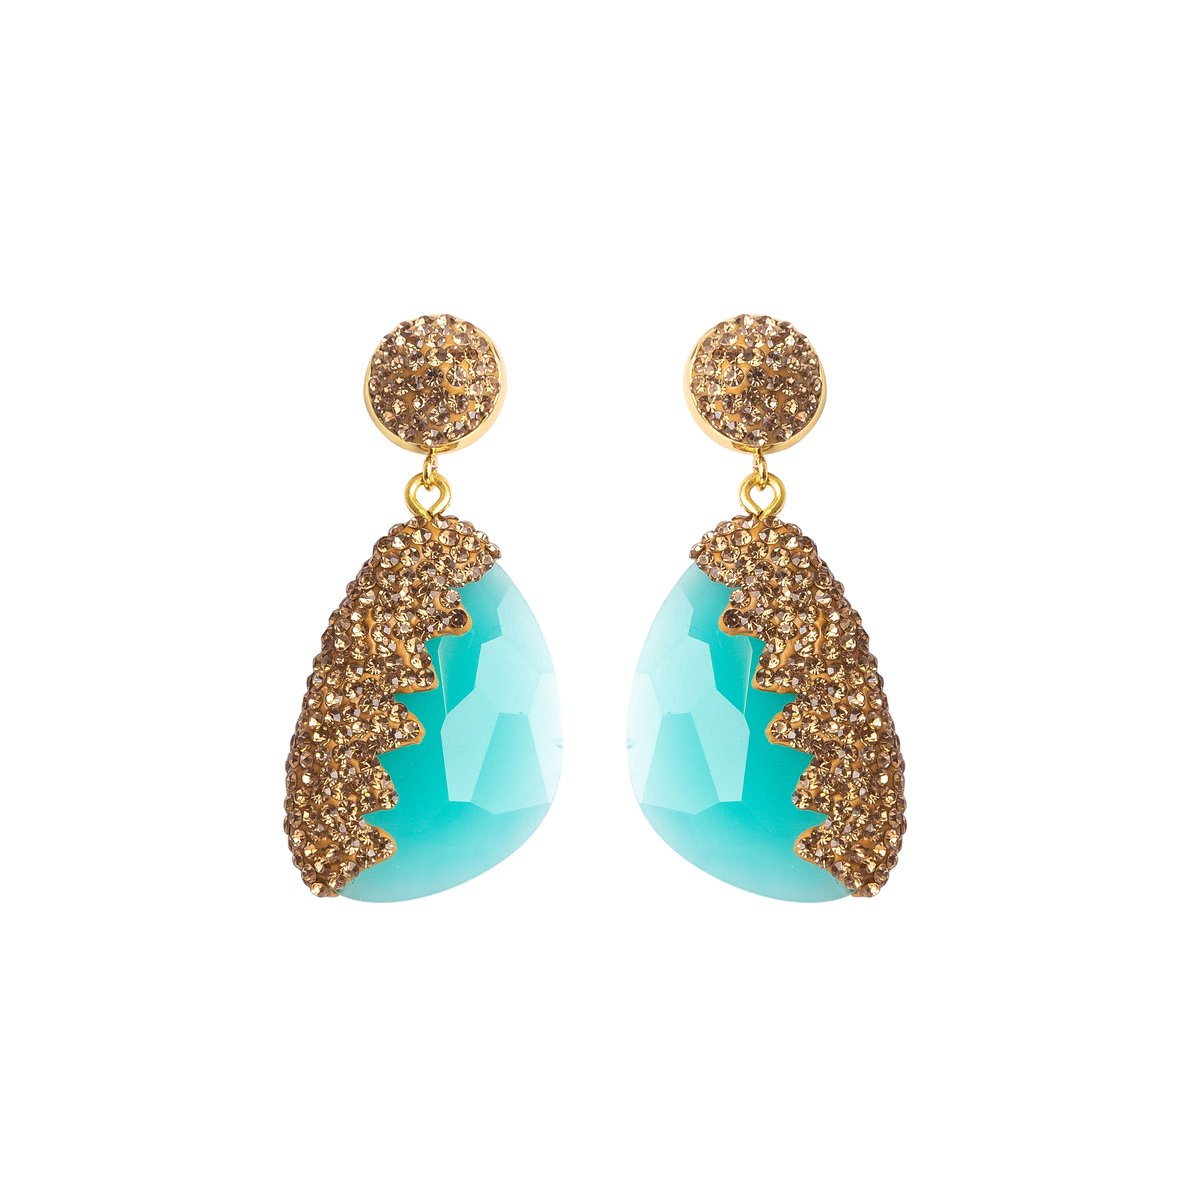 Mary Earrings - Turquoise